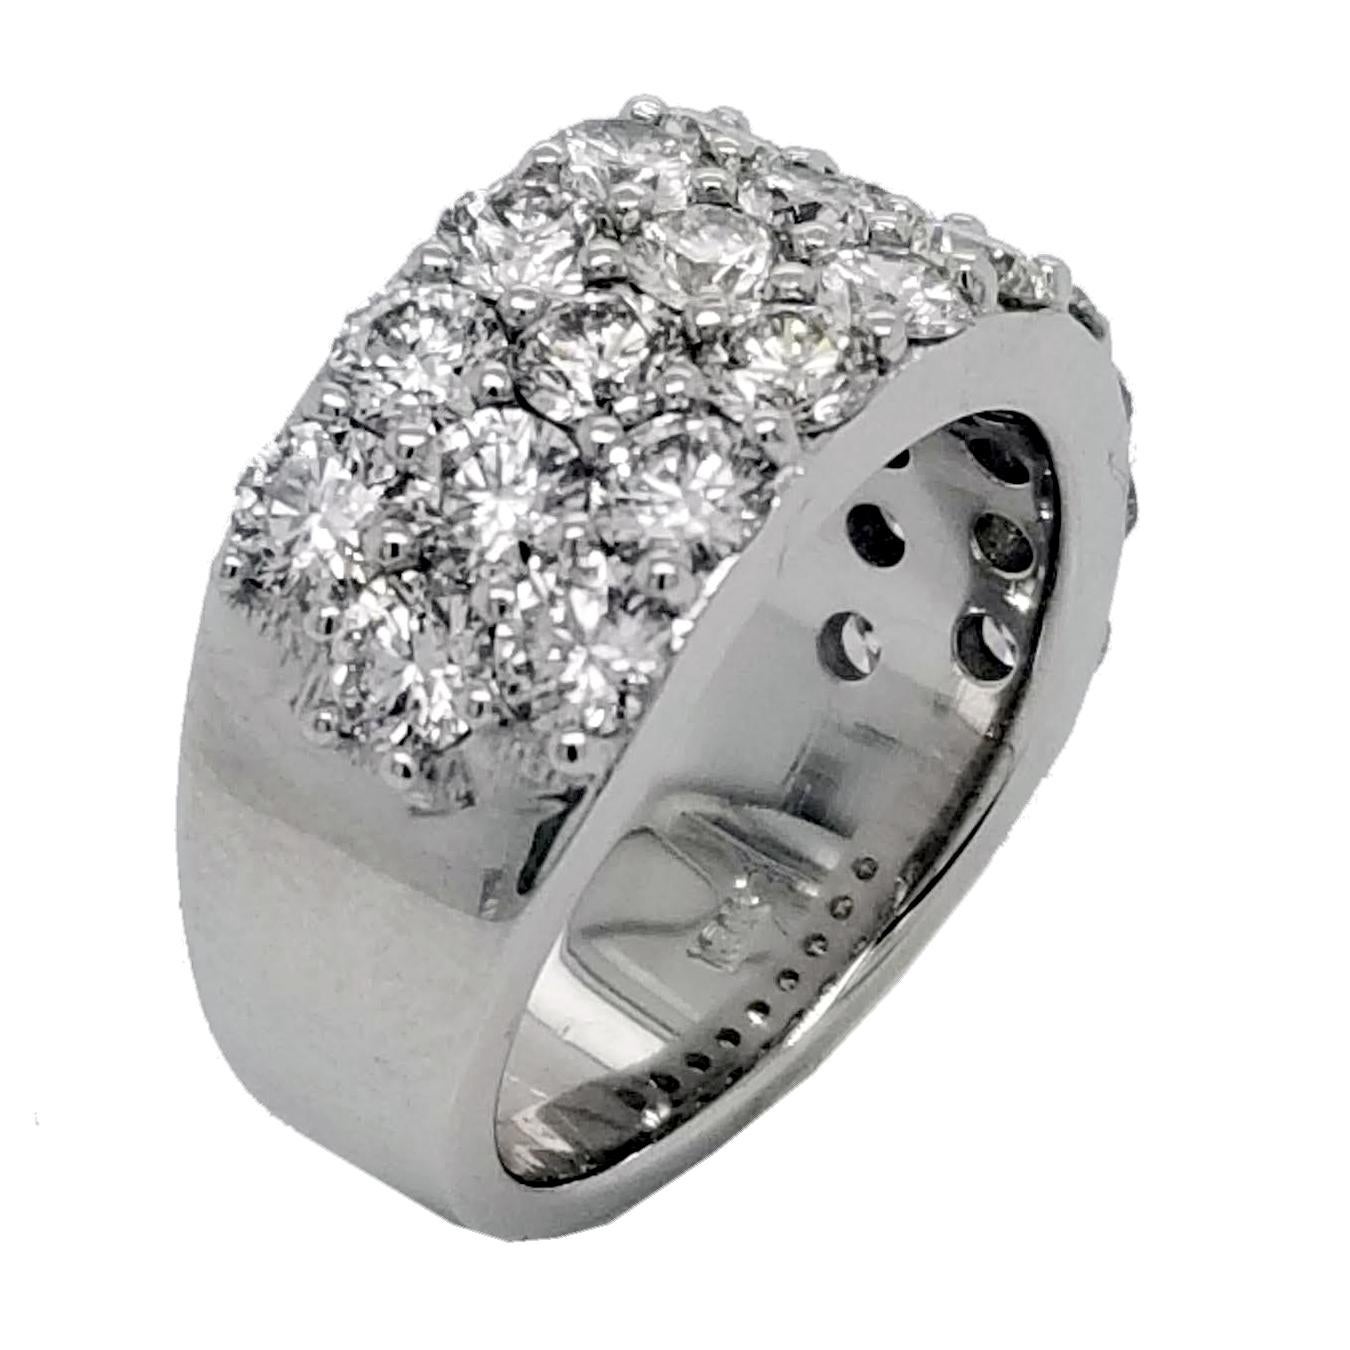 This beautiful Anniversary Ring is made of 18 Karat White gold showcasing 28 perfectly matched Round Brilliant Diamonds Set in Shared Prong Mode.
The diamonds are VS Clarity E to F Color.
Total Weight of diamonds: 3.53 Ct  (28 pieces of 3.2